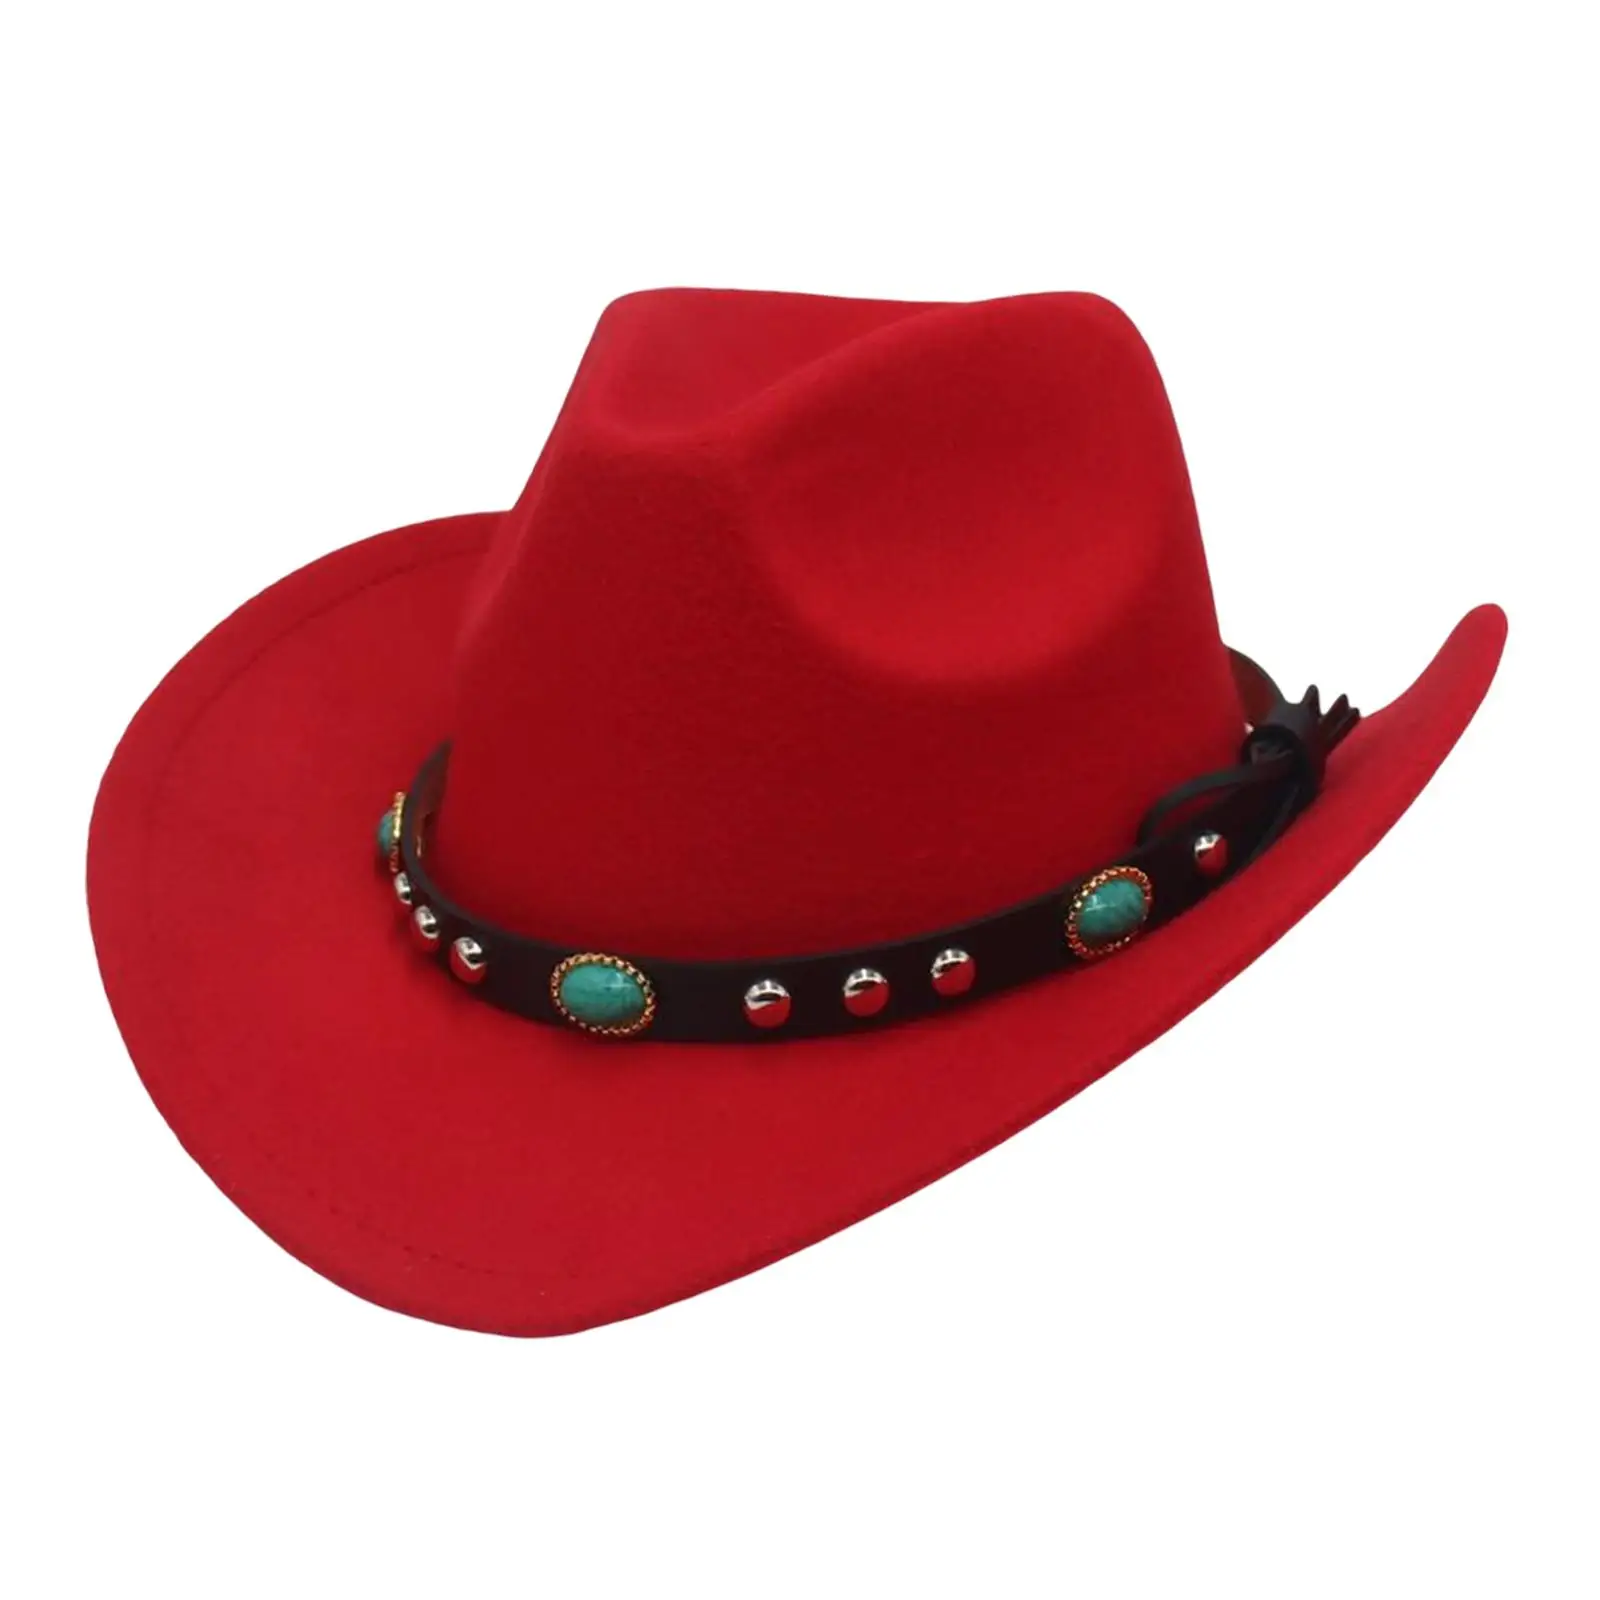 Women and Men Western Cowboy Hat Wide Brim Sun Protect Hat Vintage Panama Cowgirl Hat for Travel Camping Autumn Holiday